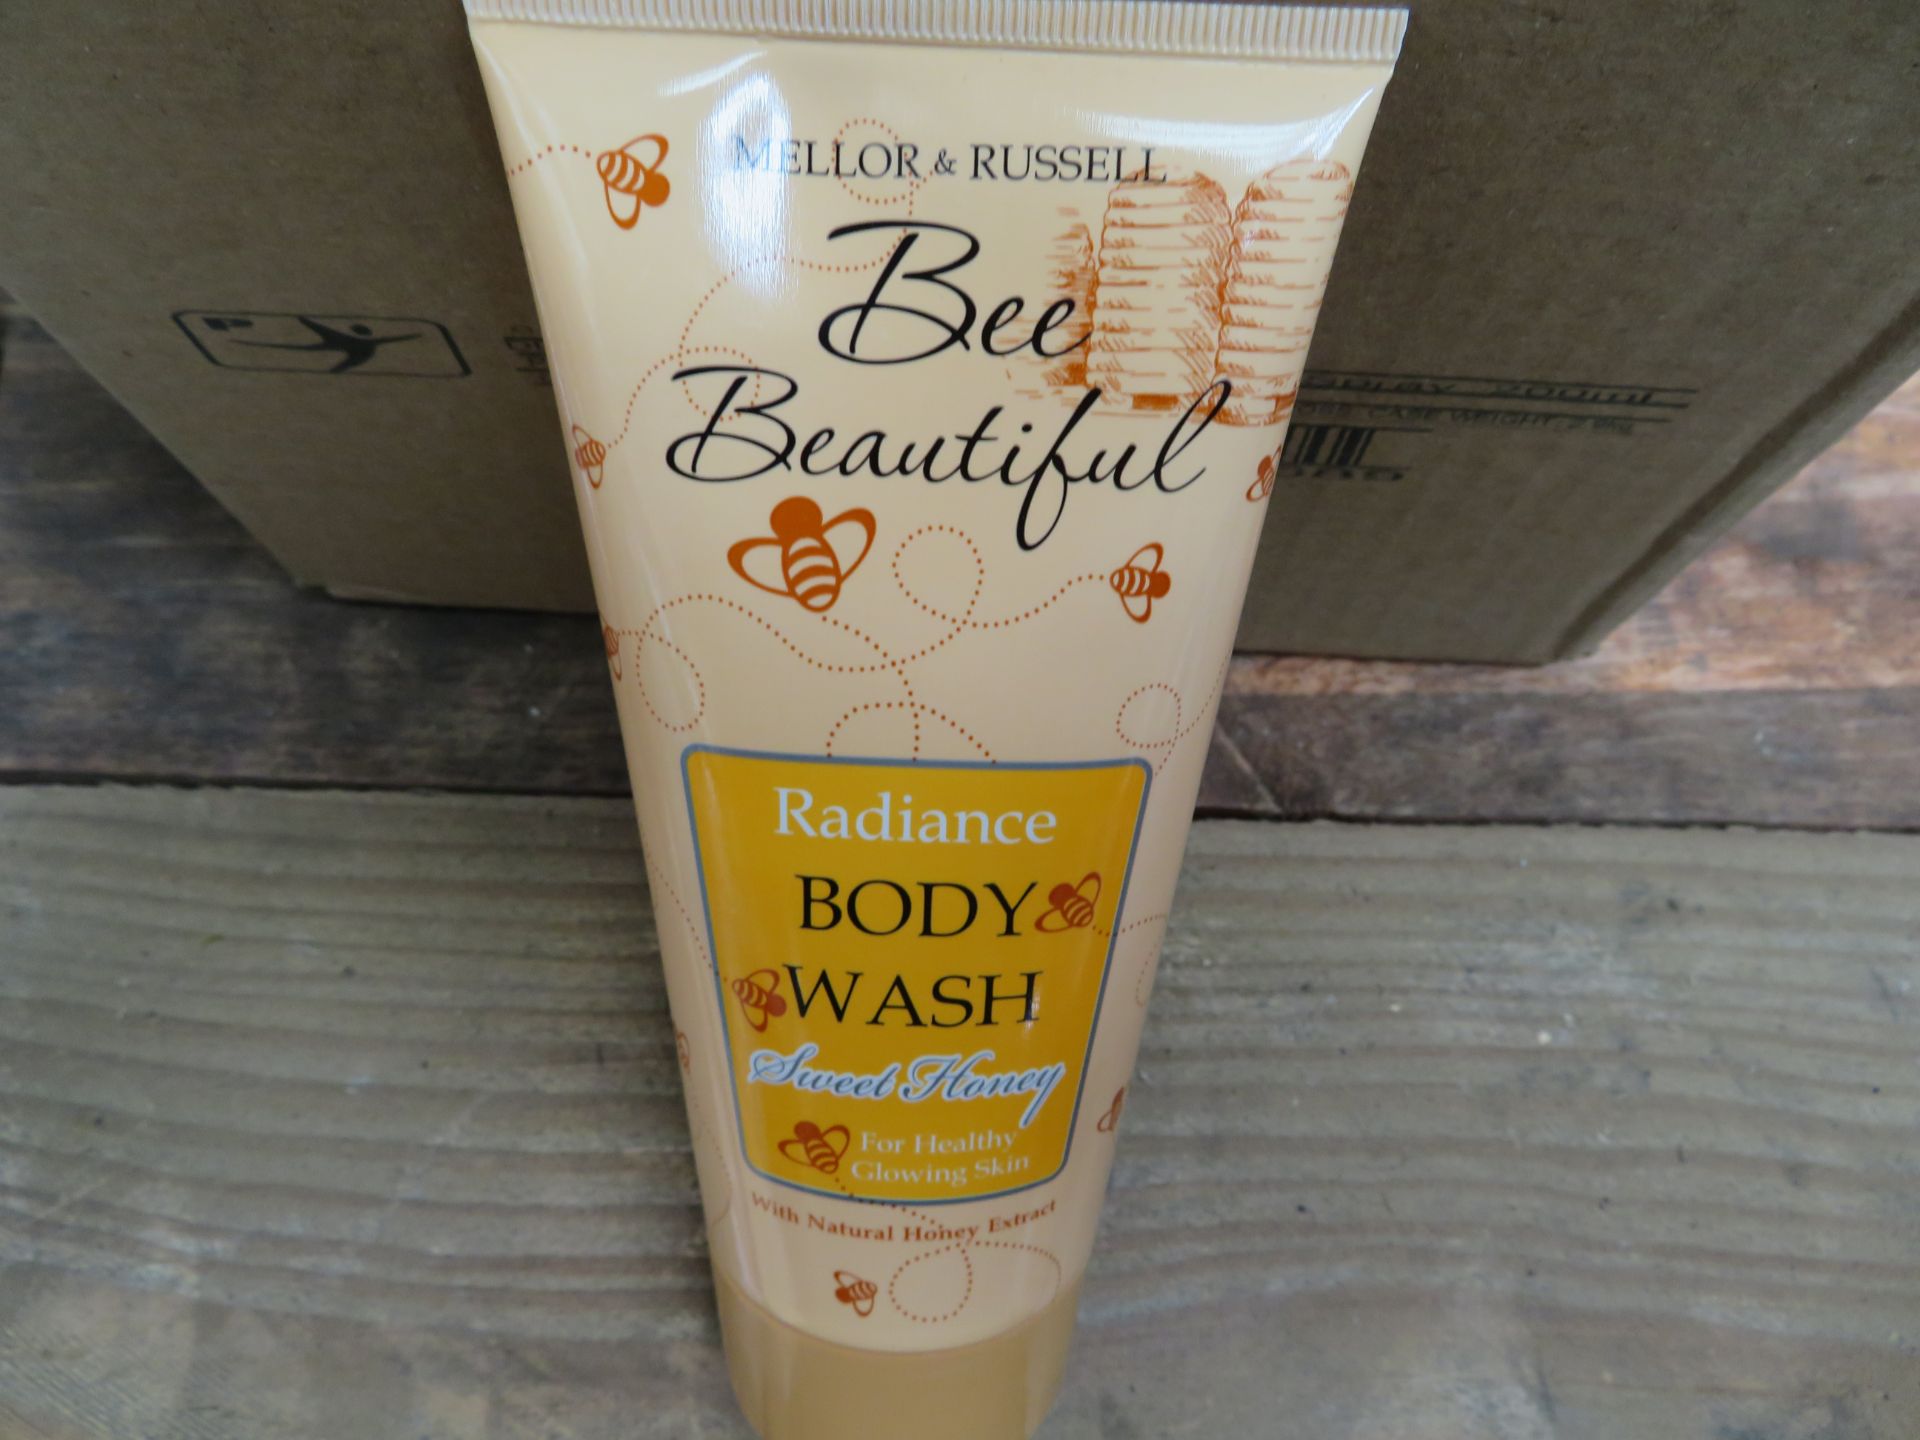 192 x Mellor & Russell Bee Beautiful Radiance Body Wash Sweet Honey with Natural Honey Extract. - Bild 3 aus 3